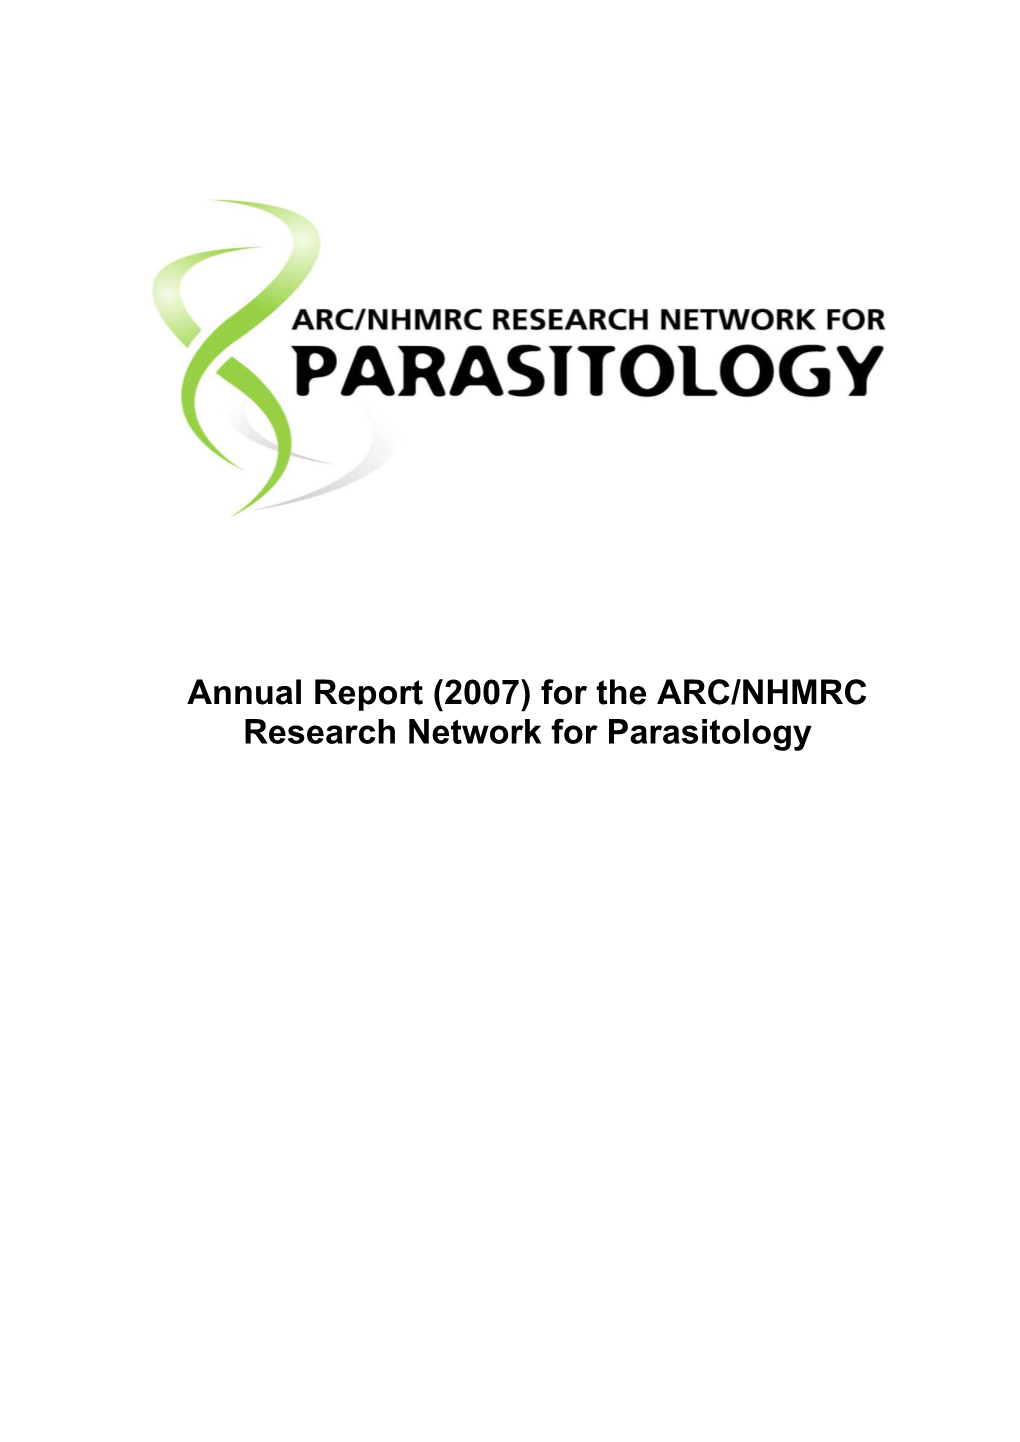 Annual Report (2007) for the ARC/NHMRC Research Network for Parasitology